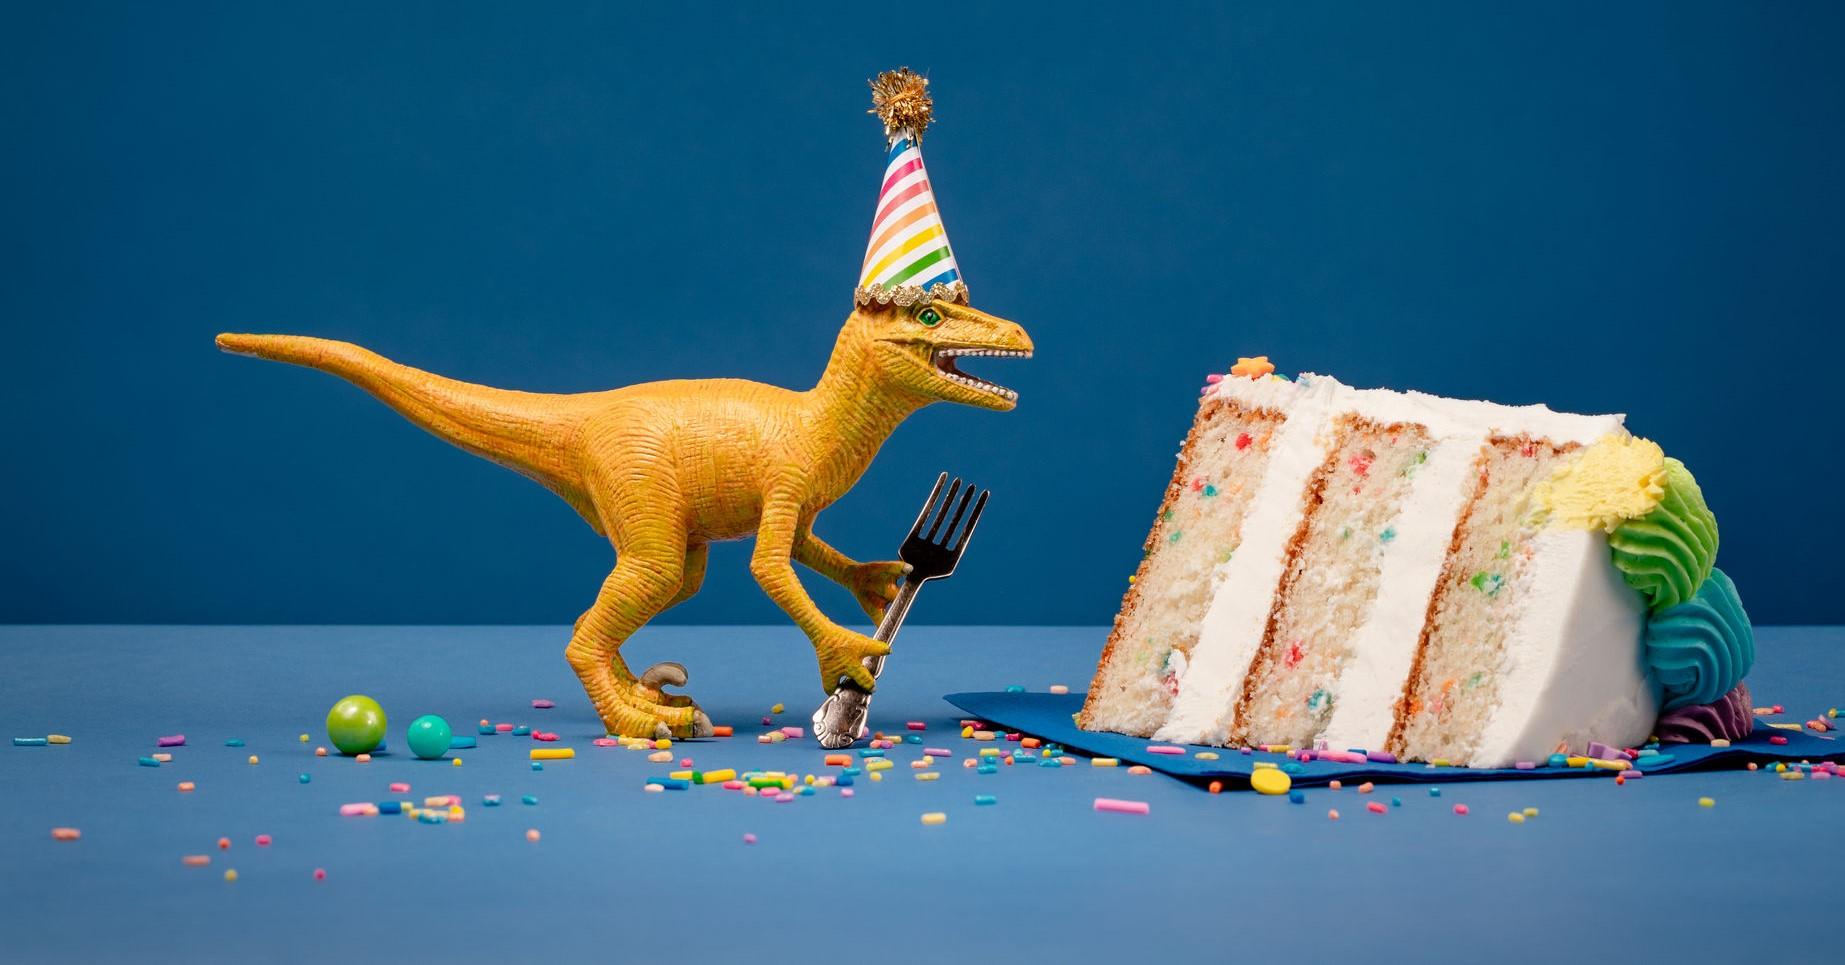 Toy Dinosaur holding a fork next to a slice of birthday cake on a blue background.